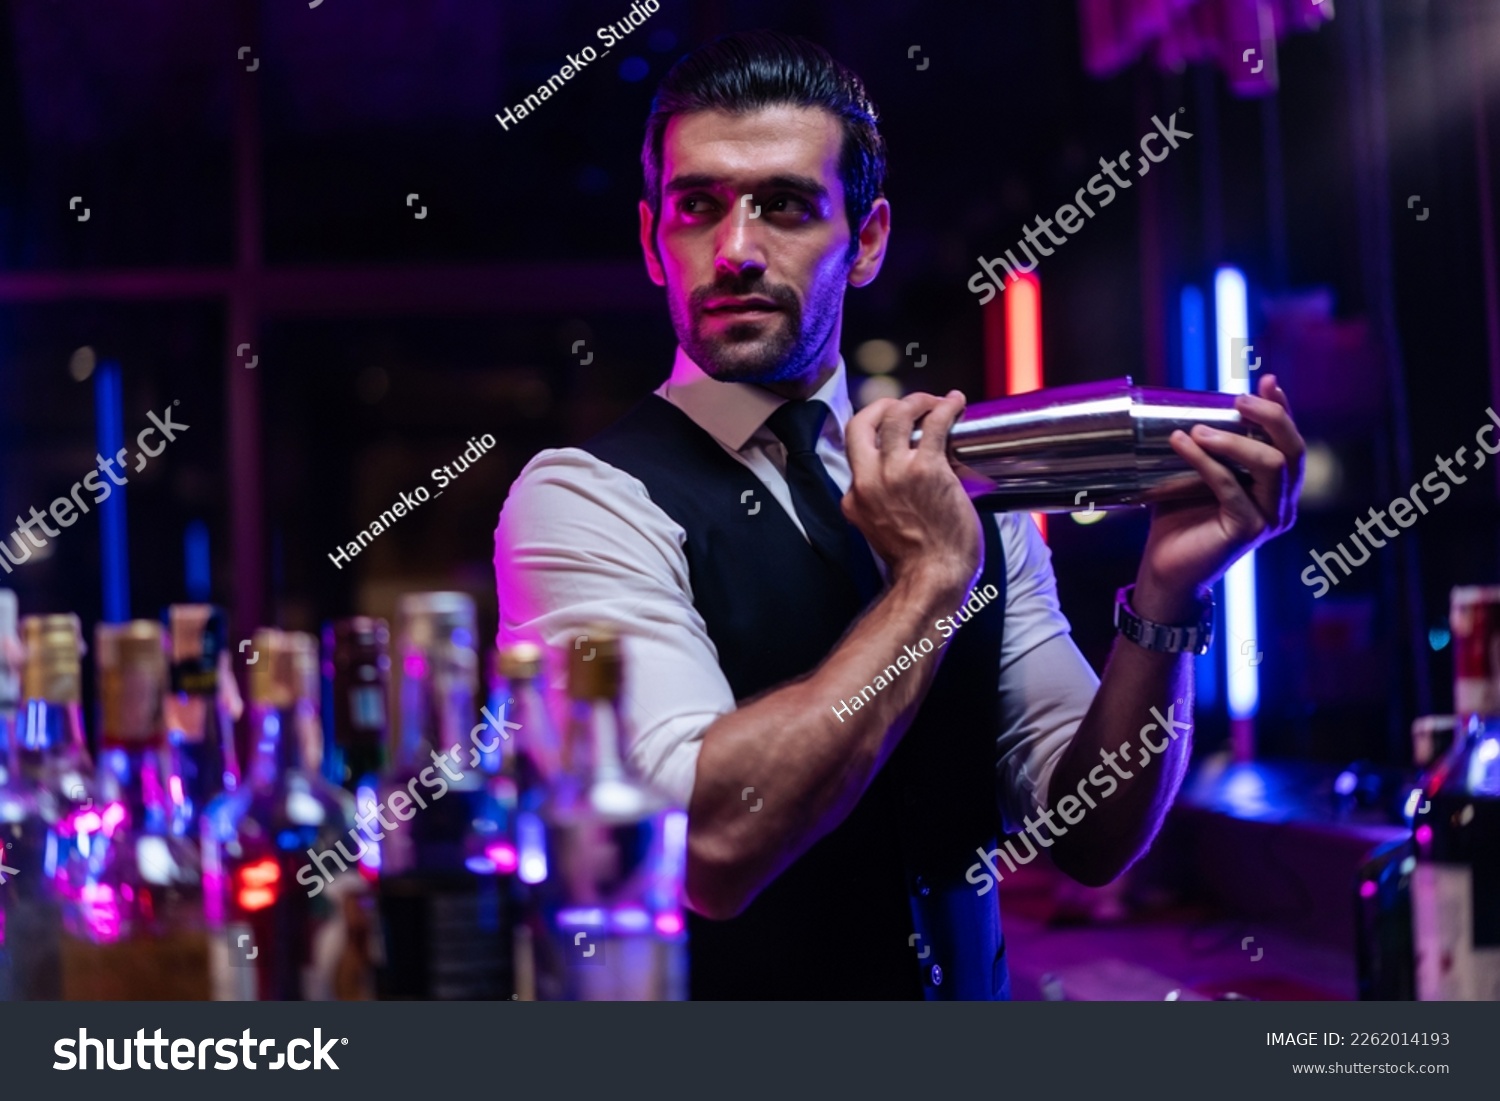 Caucasian profession bartender making a cocktail for women at a bar. Attractive barman pouring mixes liquor ingredients cocktail drink from cocktail shaker into the glass at night club restaurant. #2262014193